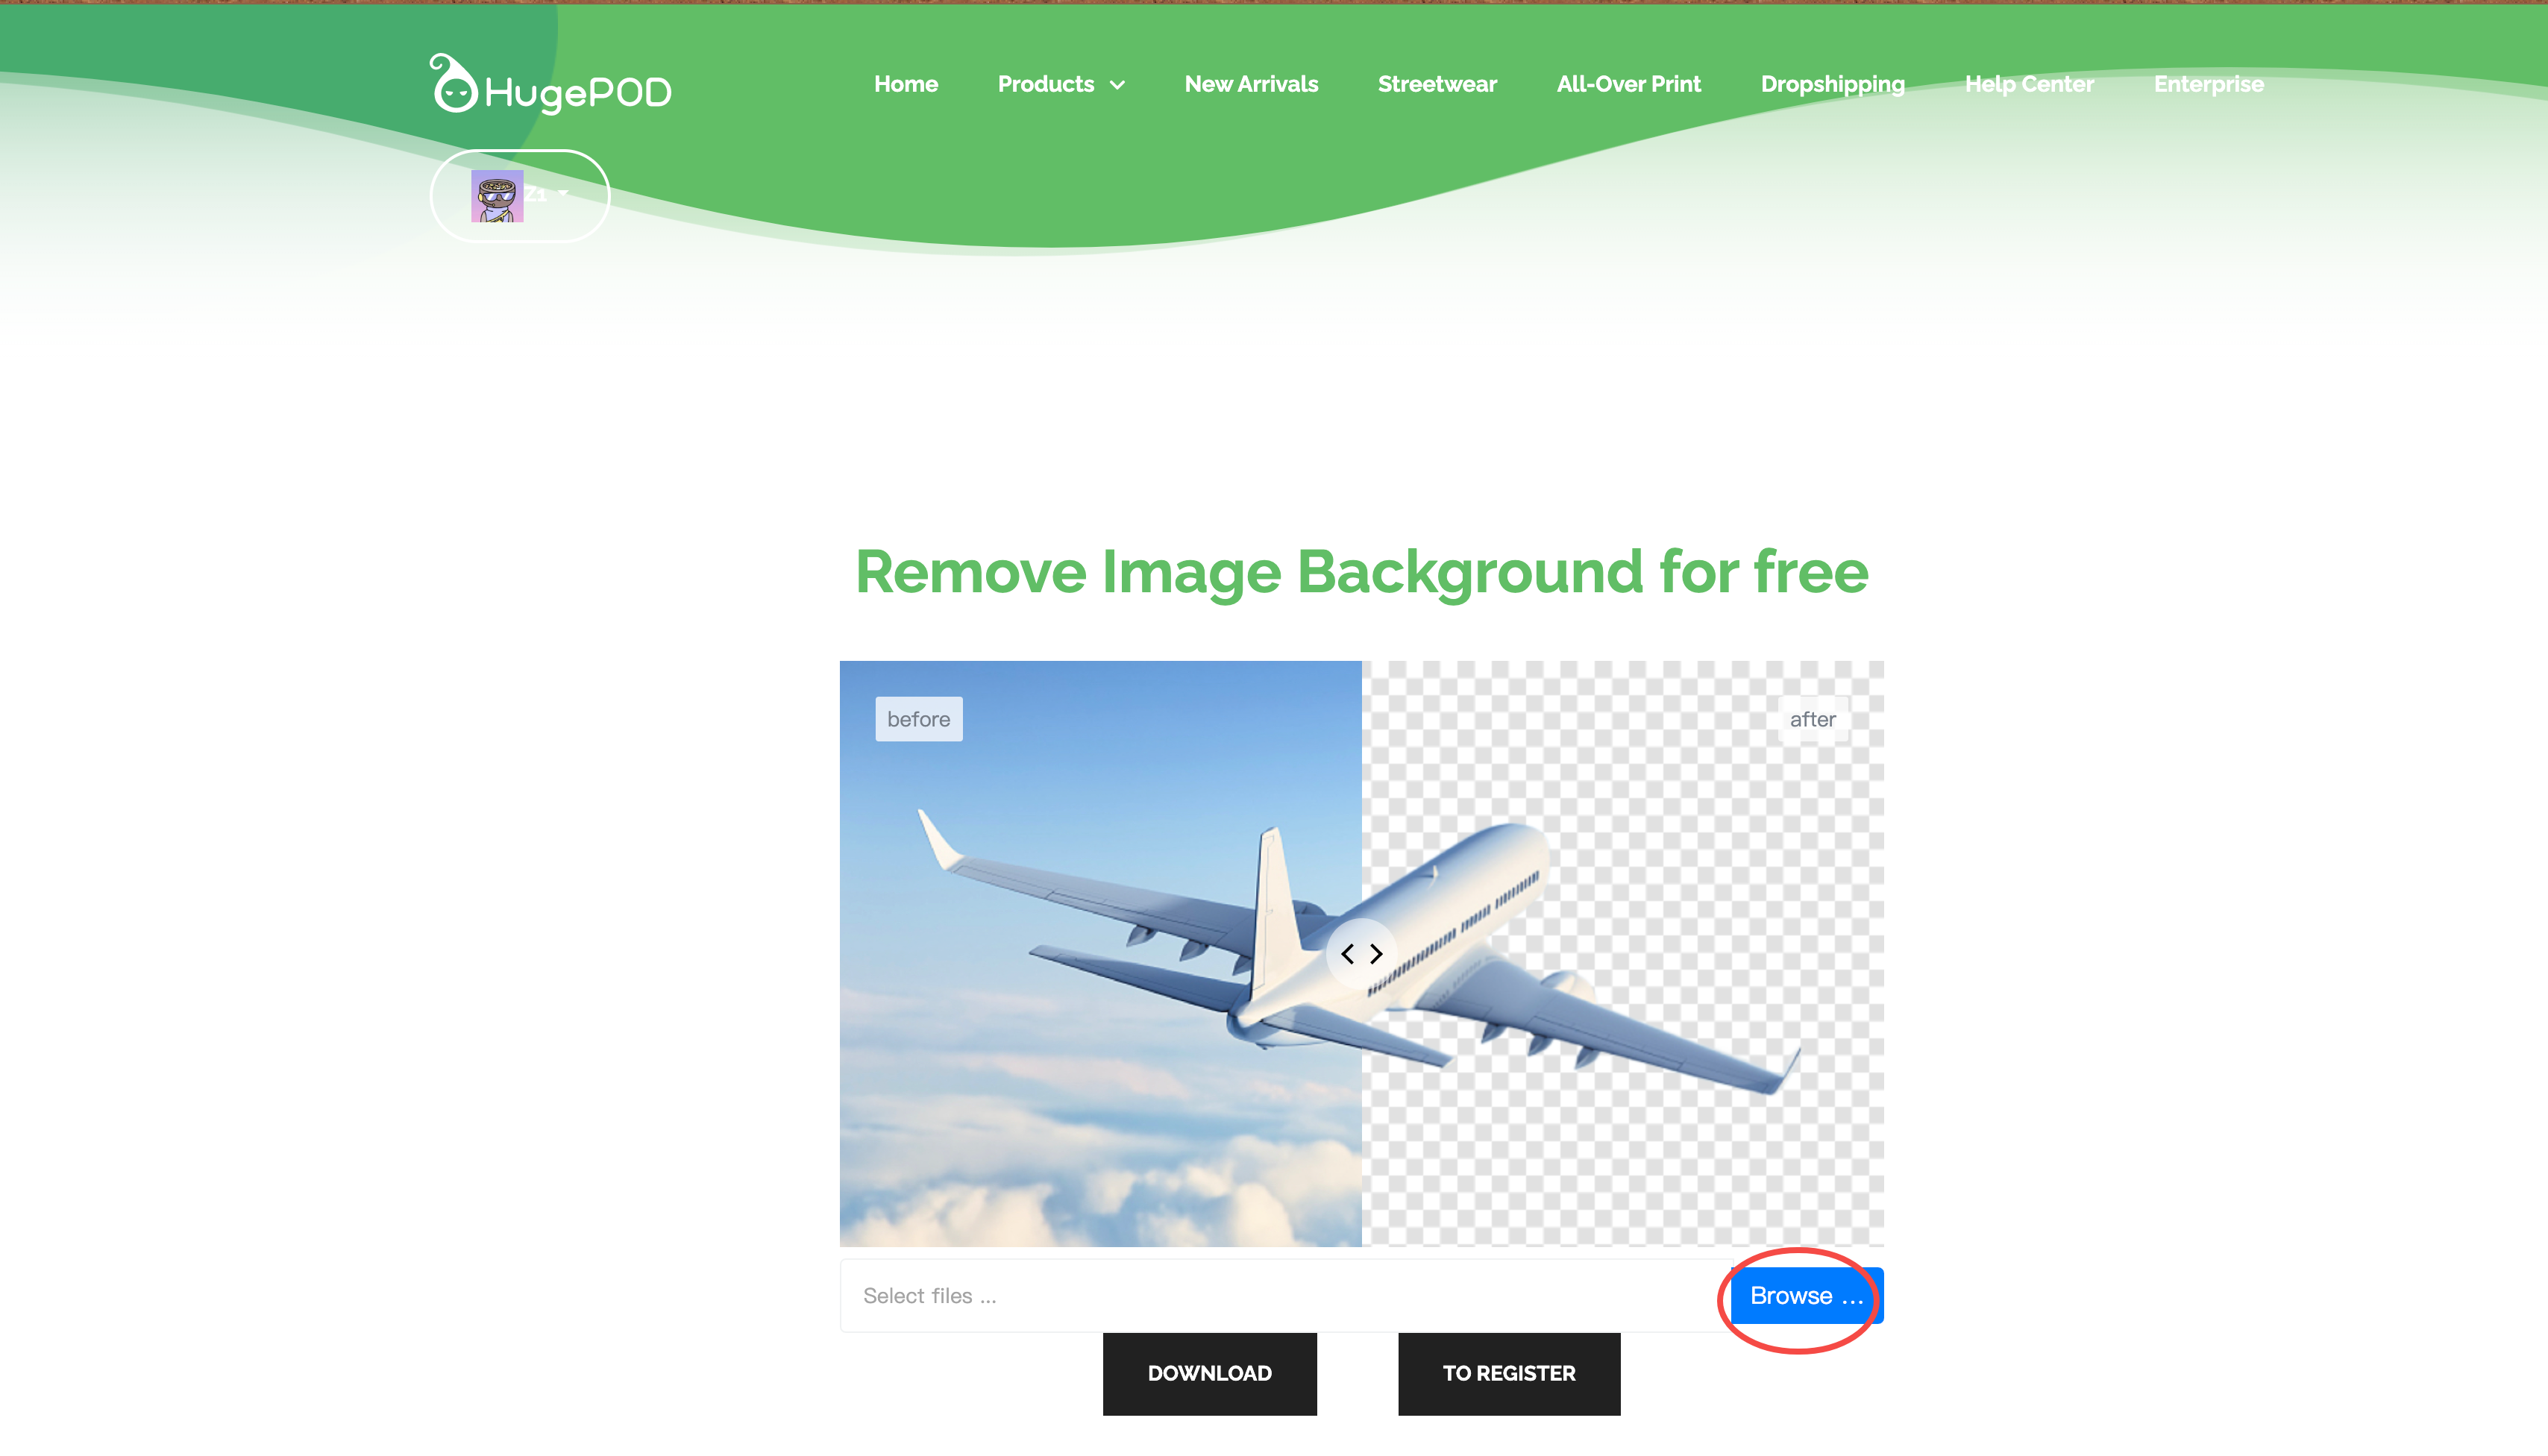 Remove Image Background Easily with HugePOD Free Tool